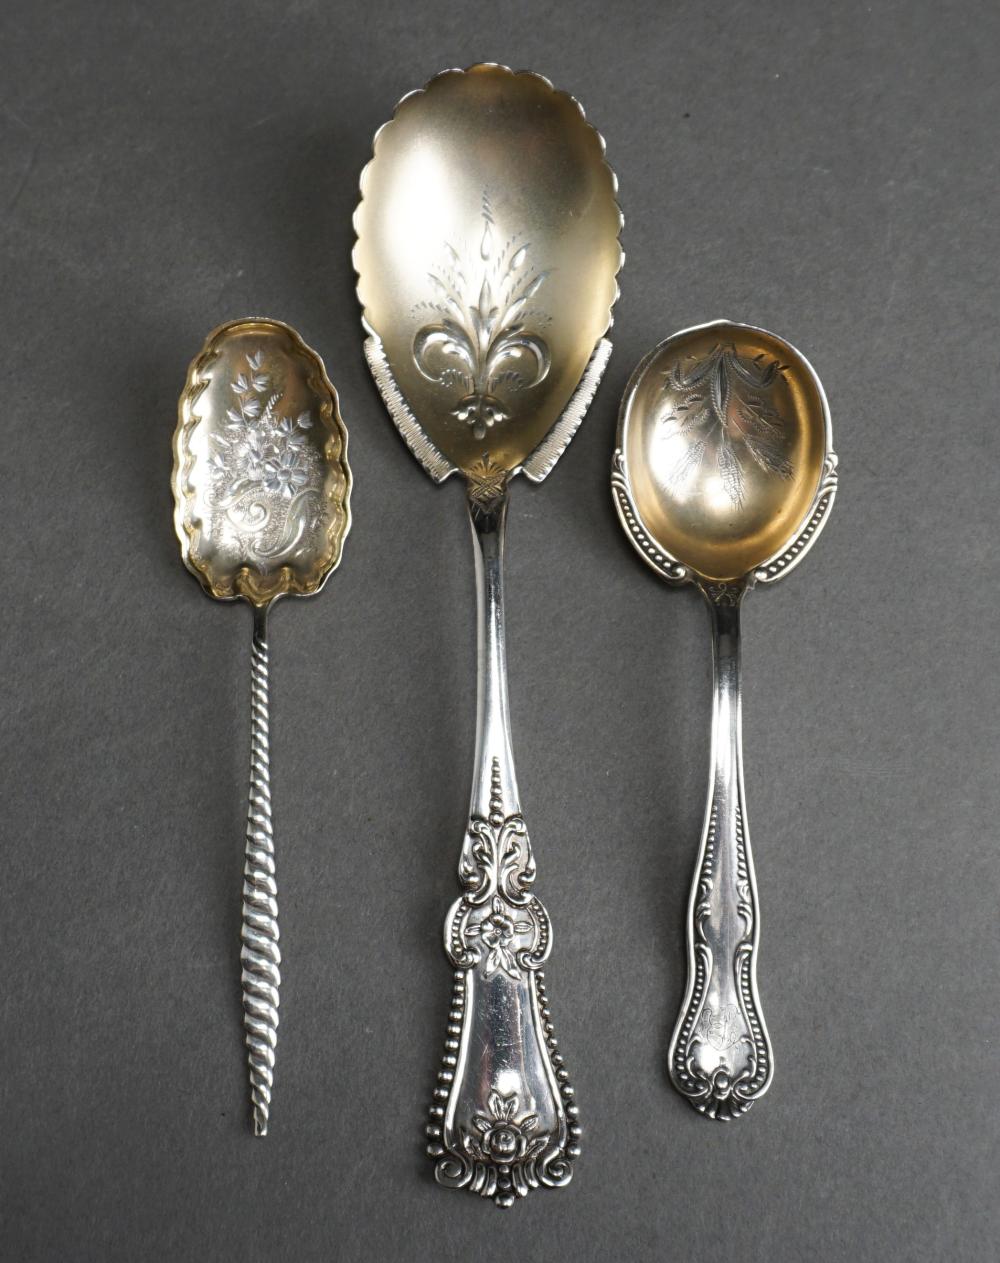 THREE PARTIAL GILT STERLING SILVER